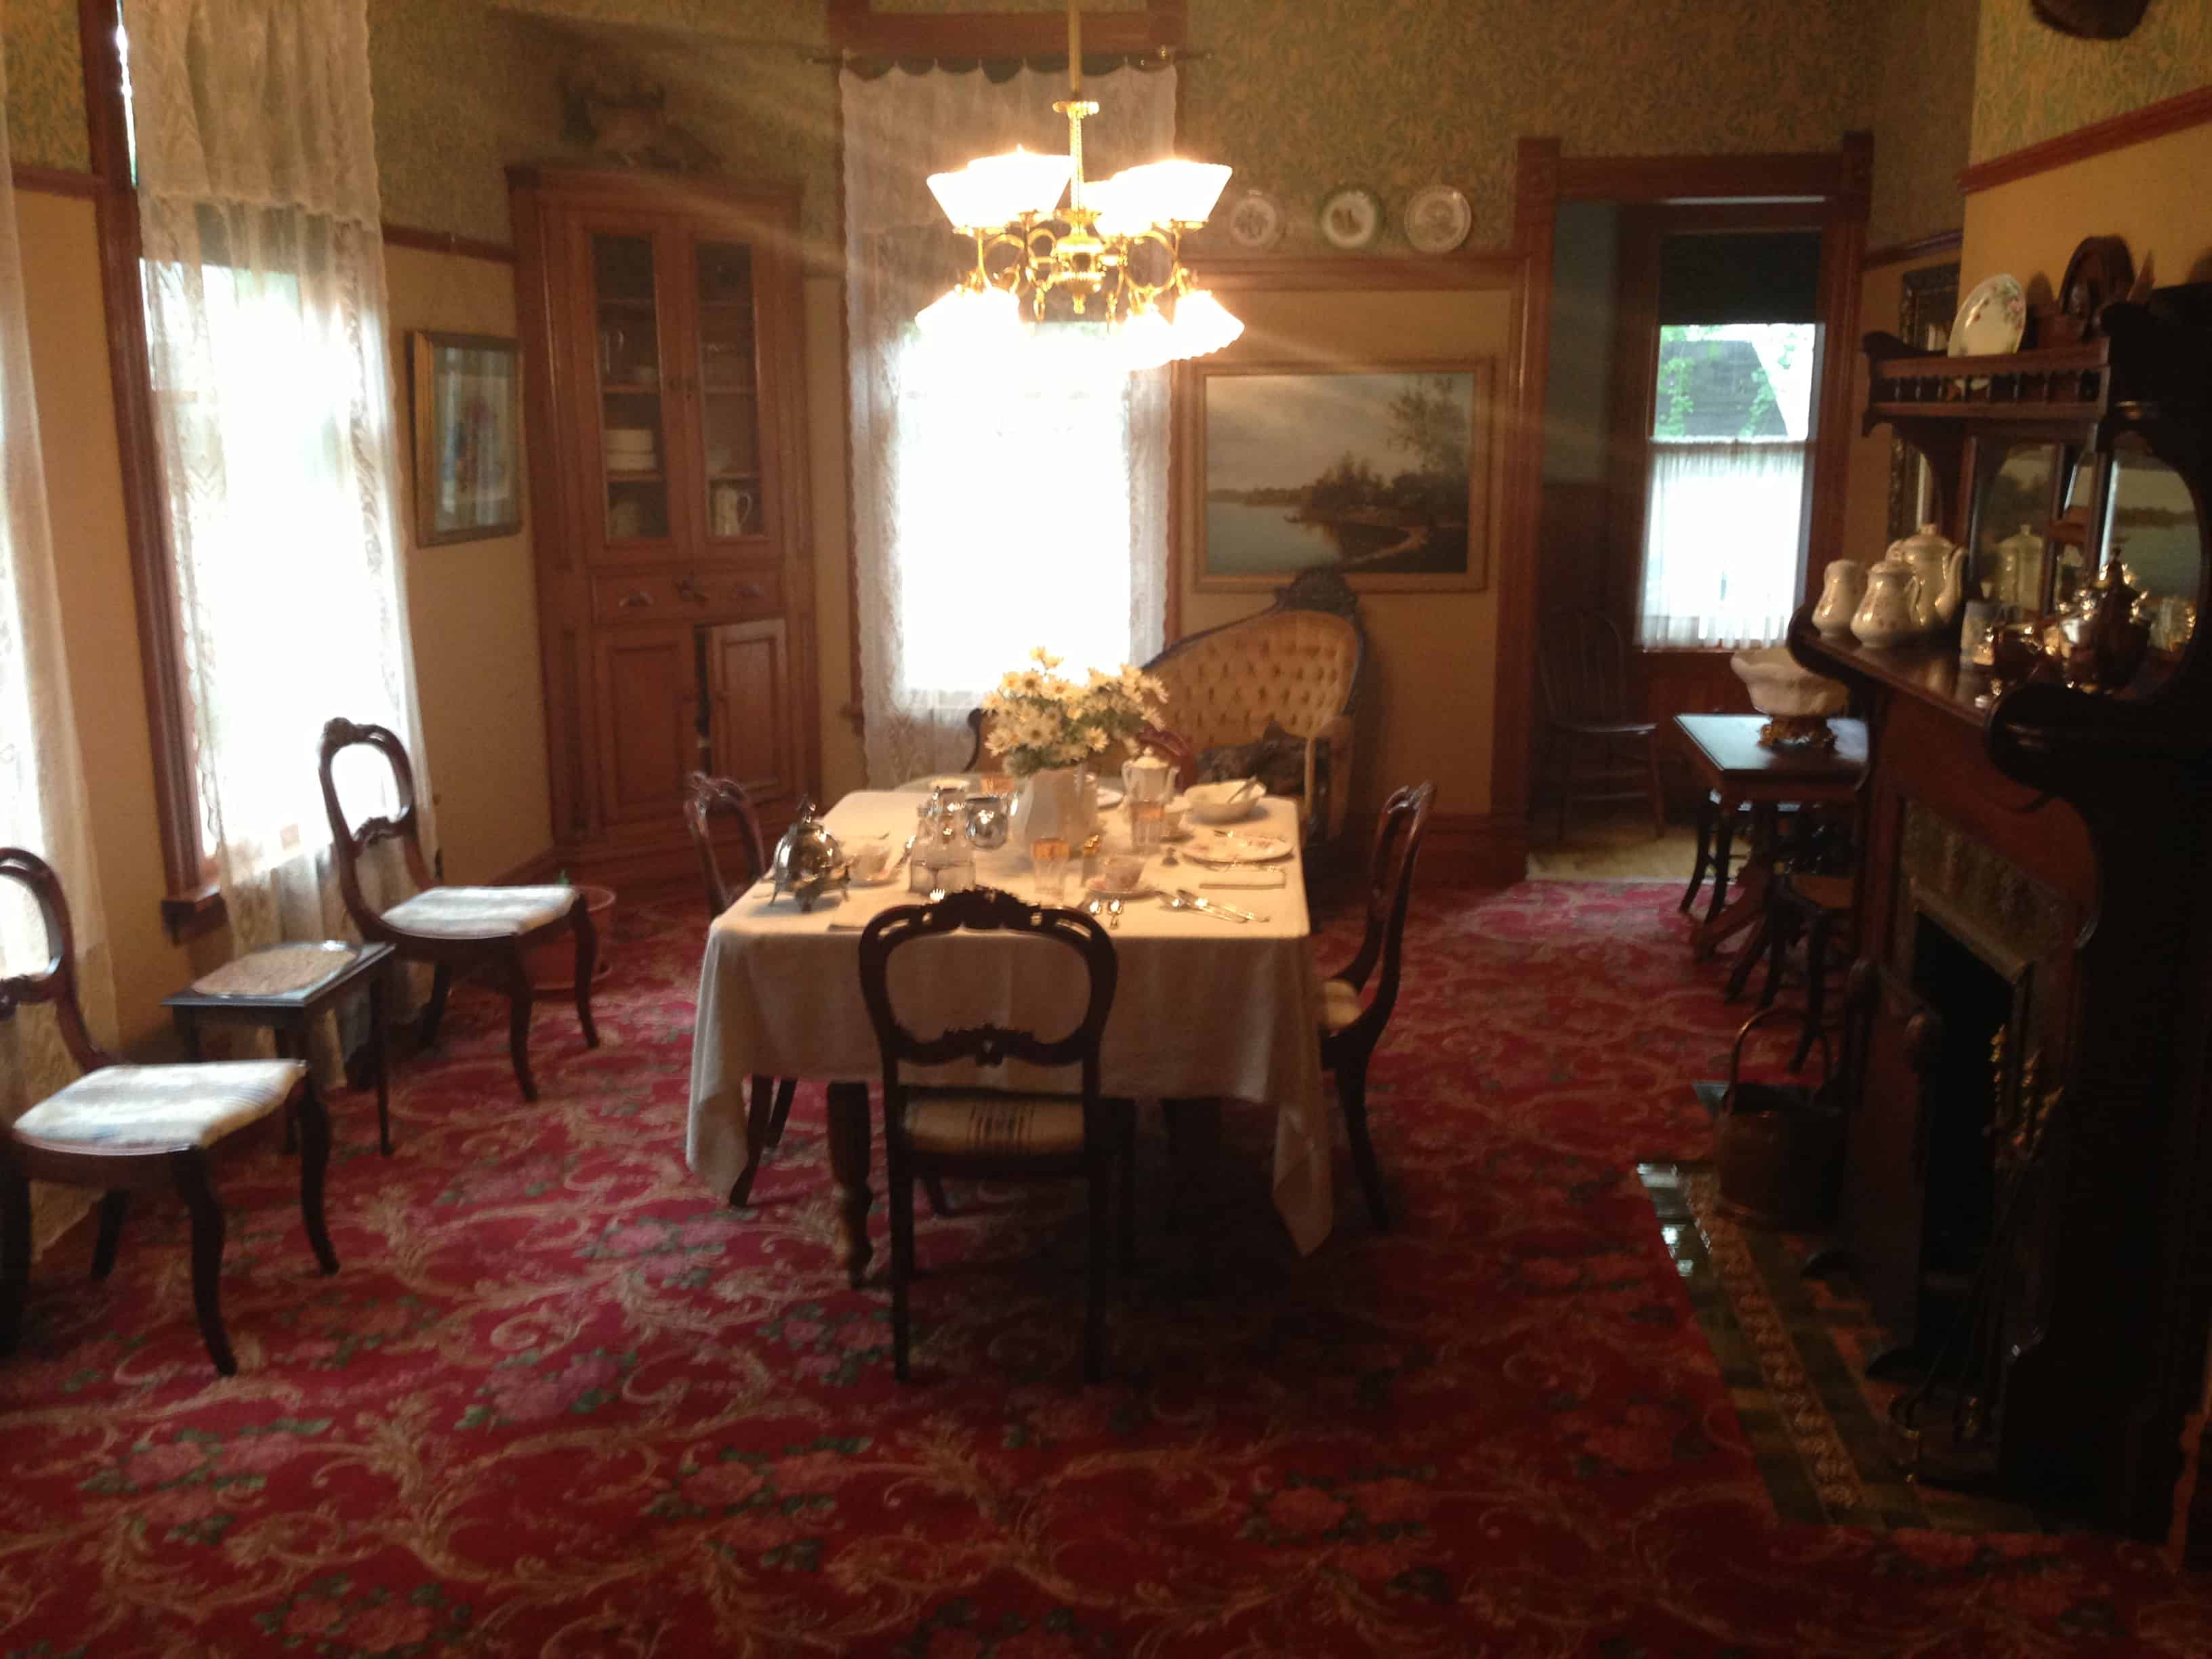 Dining room at the Ernest Hemingway Birthplace